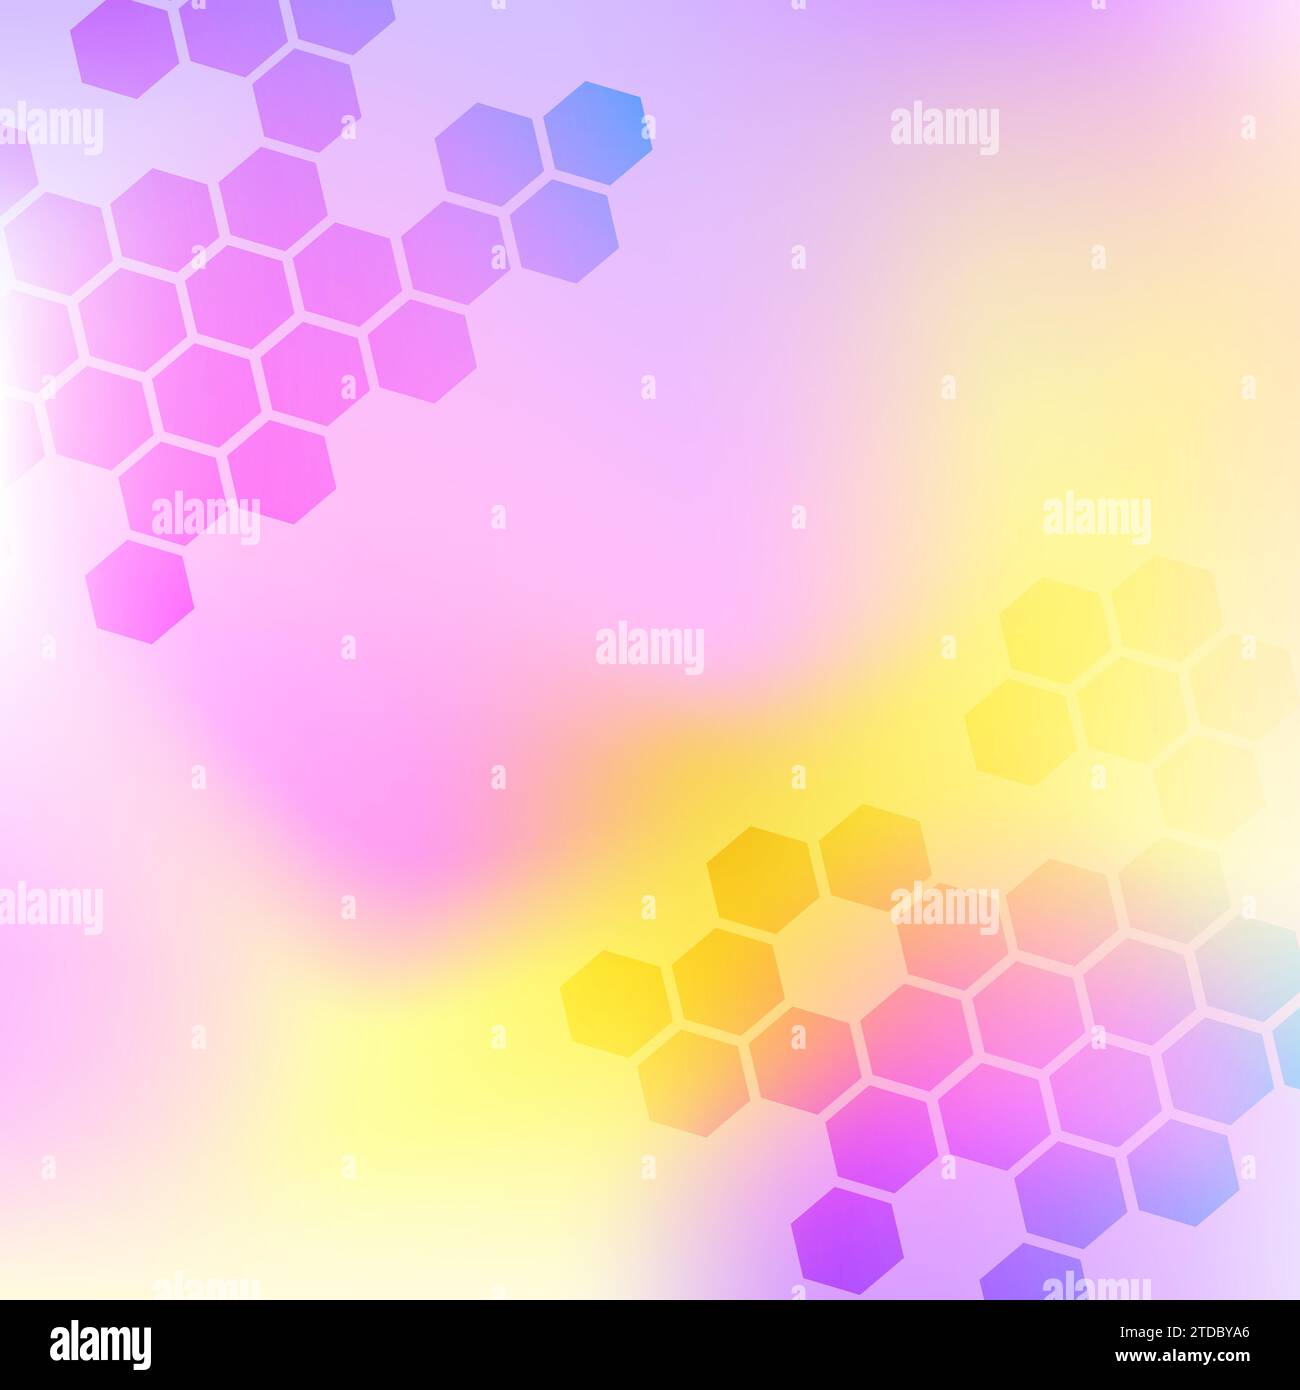 Abstract  background with hexagon shapes Stock Vector